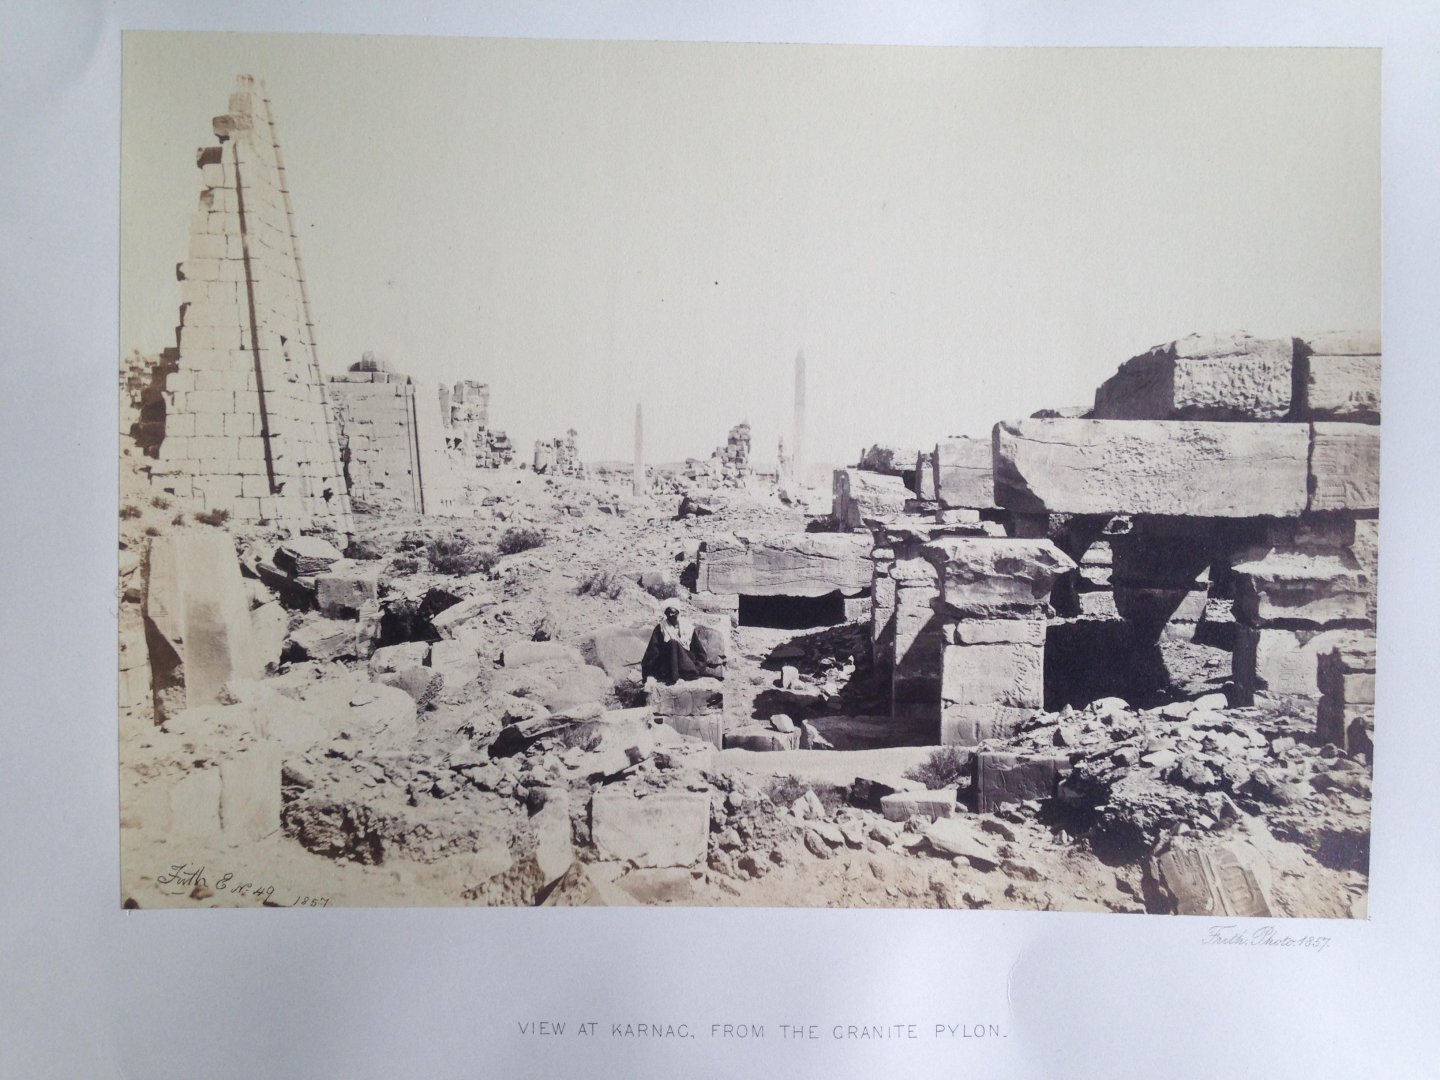 Frith, Francis - View at Karnac, from the Garnite Pylon, Series Egypt and Palestine